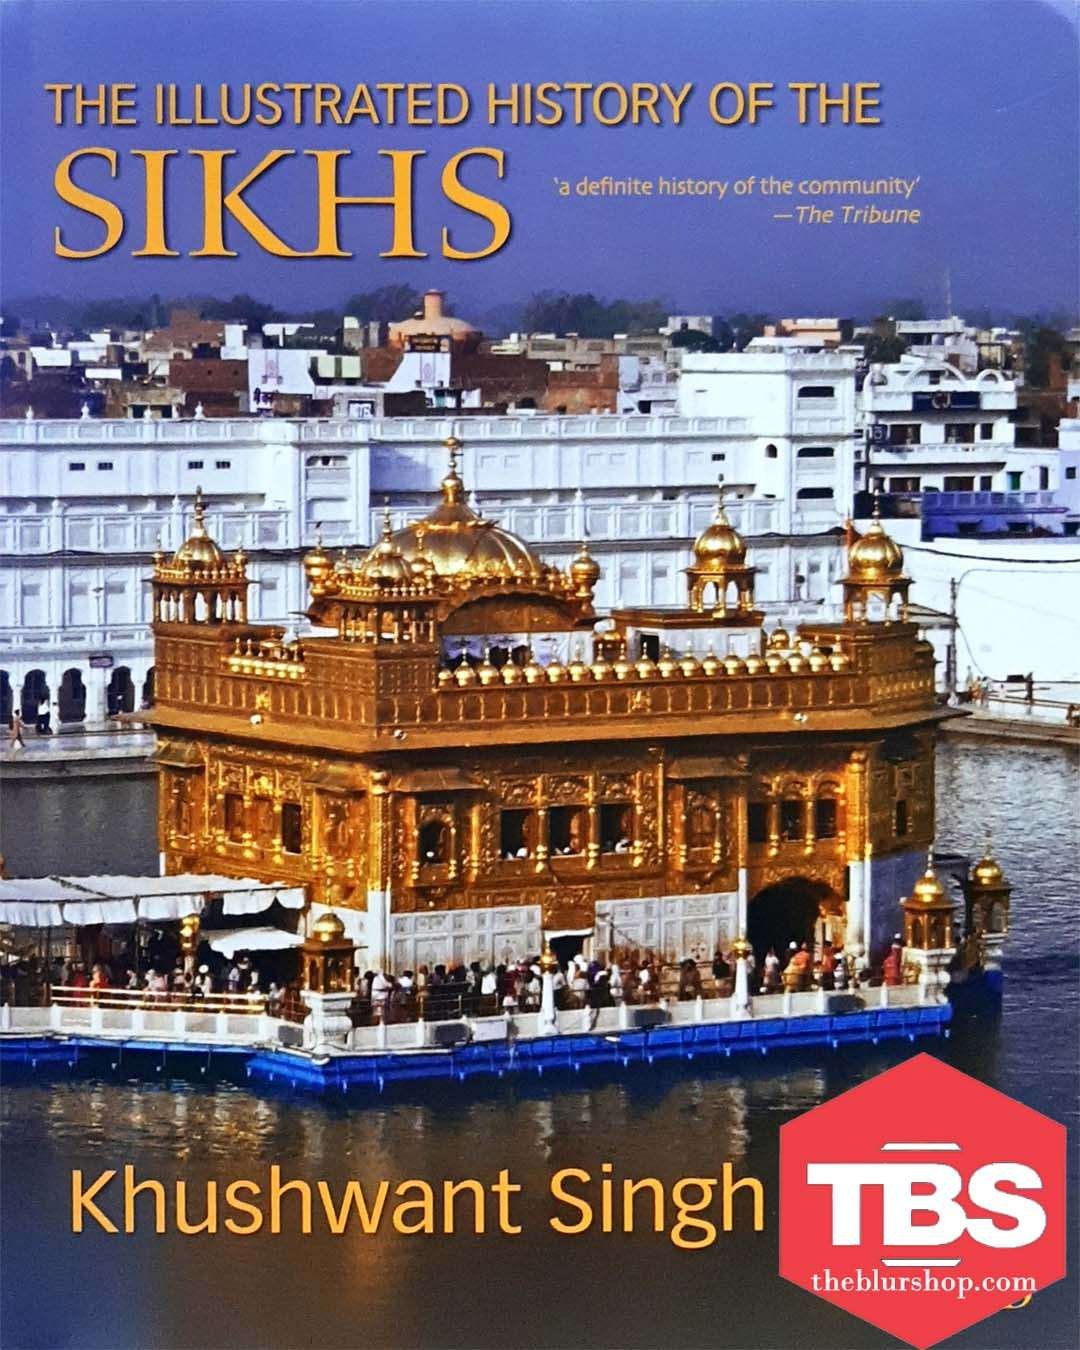 The Illustrated History of The Sikhs